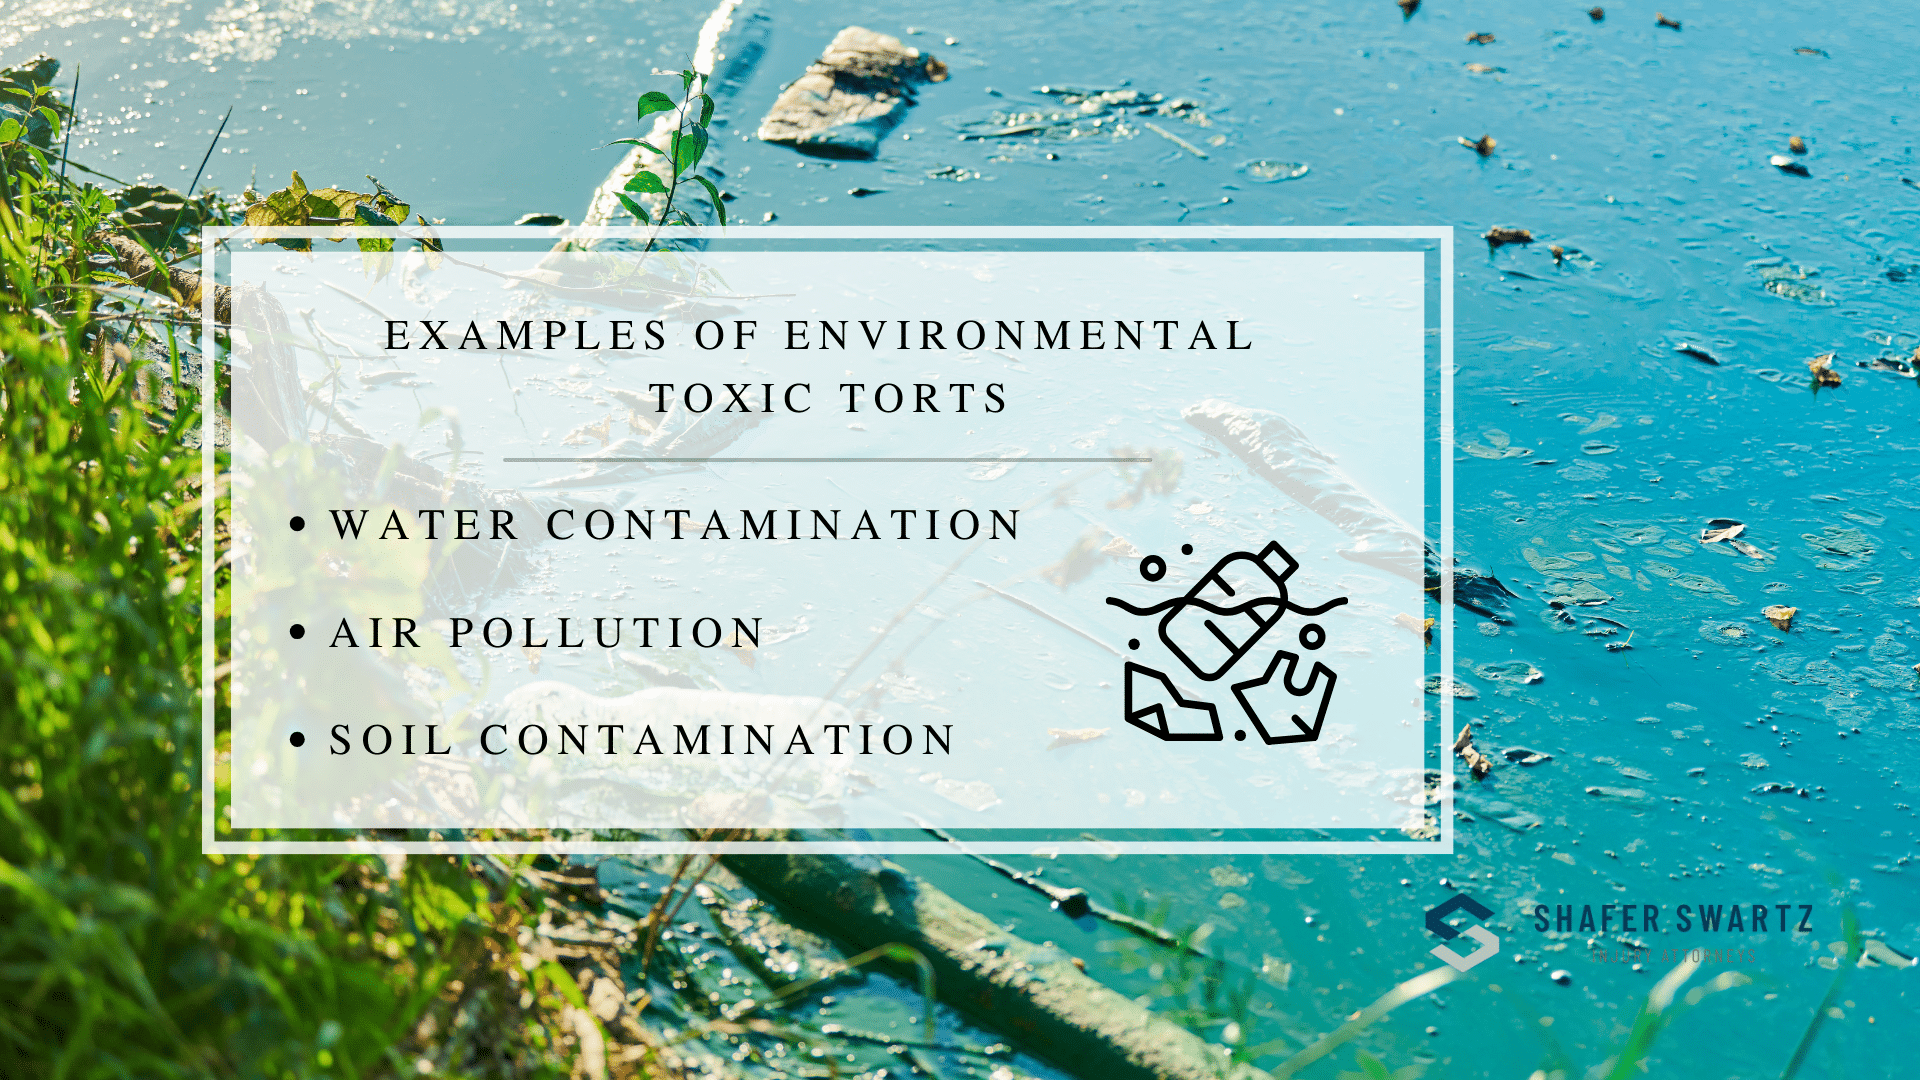 Infographic image of examples of environmental toxic torts